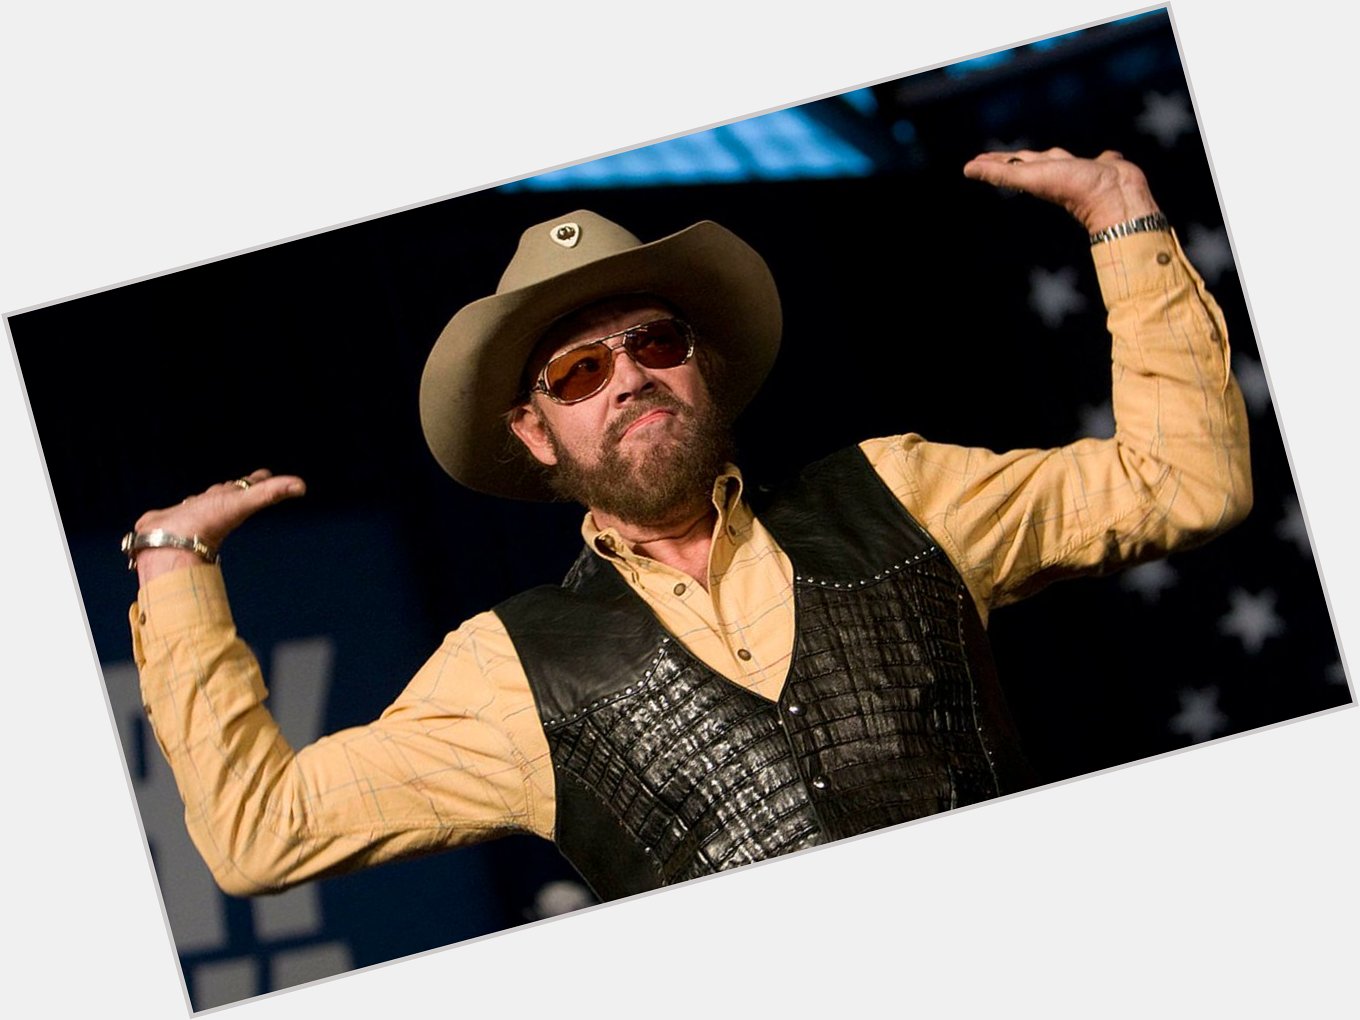 We Would Like To Wish Hank Williams Jr. A Very Happy Birthday! 